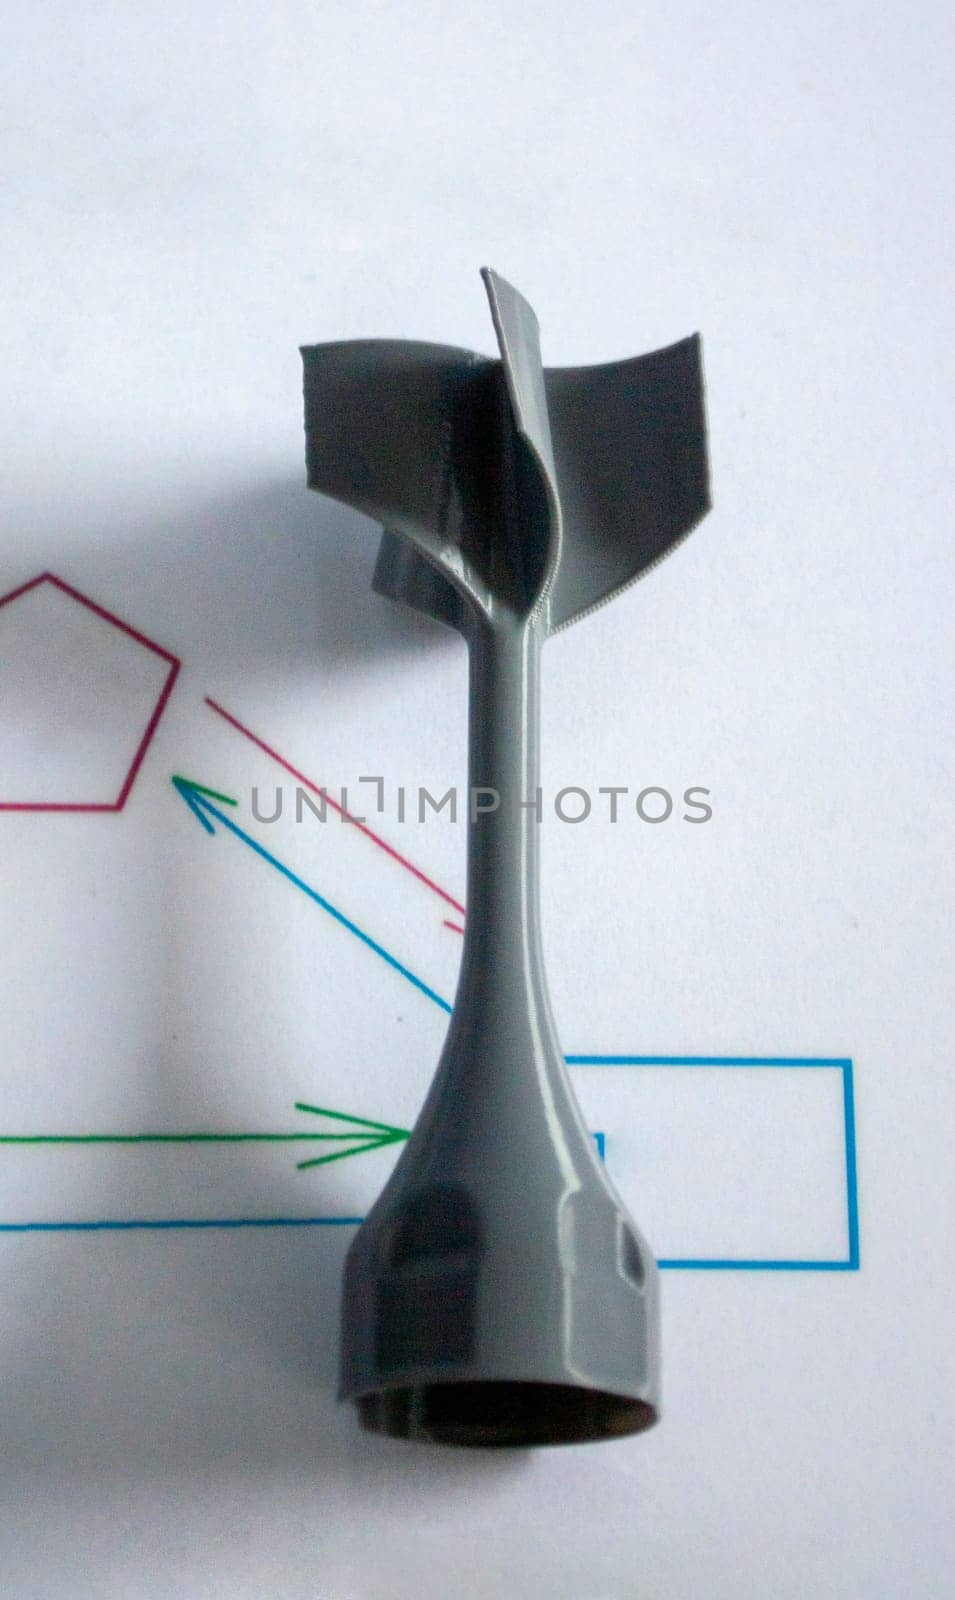 Prototype model of rocket bomb tip printed on 3D printer. Small models of tail fins, tail cone printed on 3D printer from molten plastic on table. New modern innovation printing technology